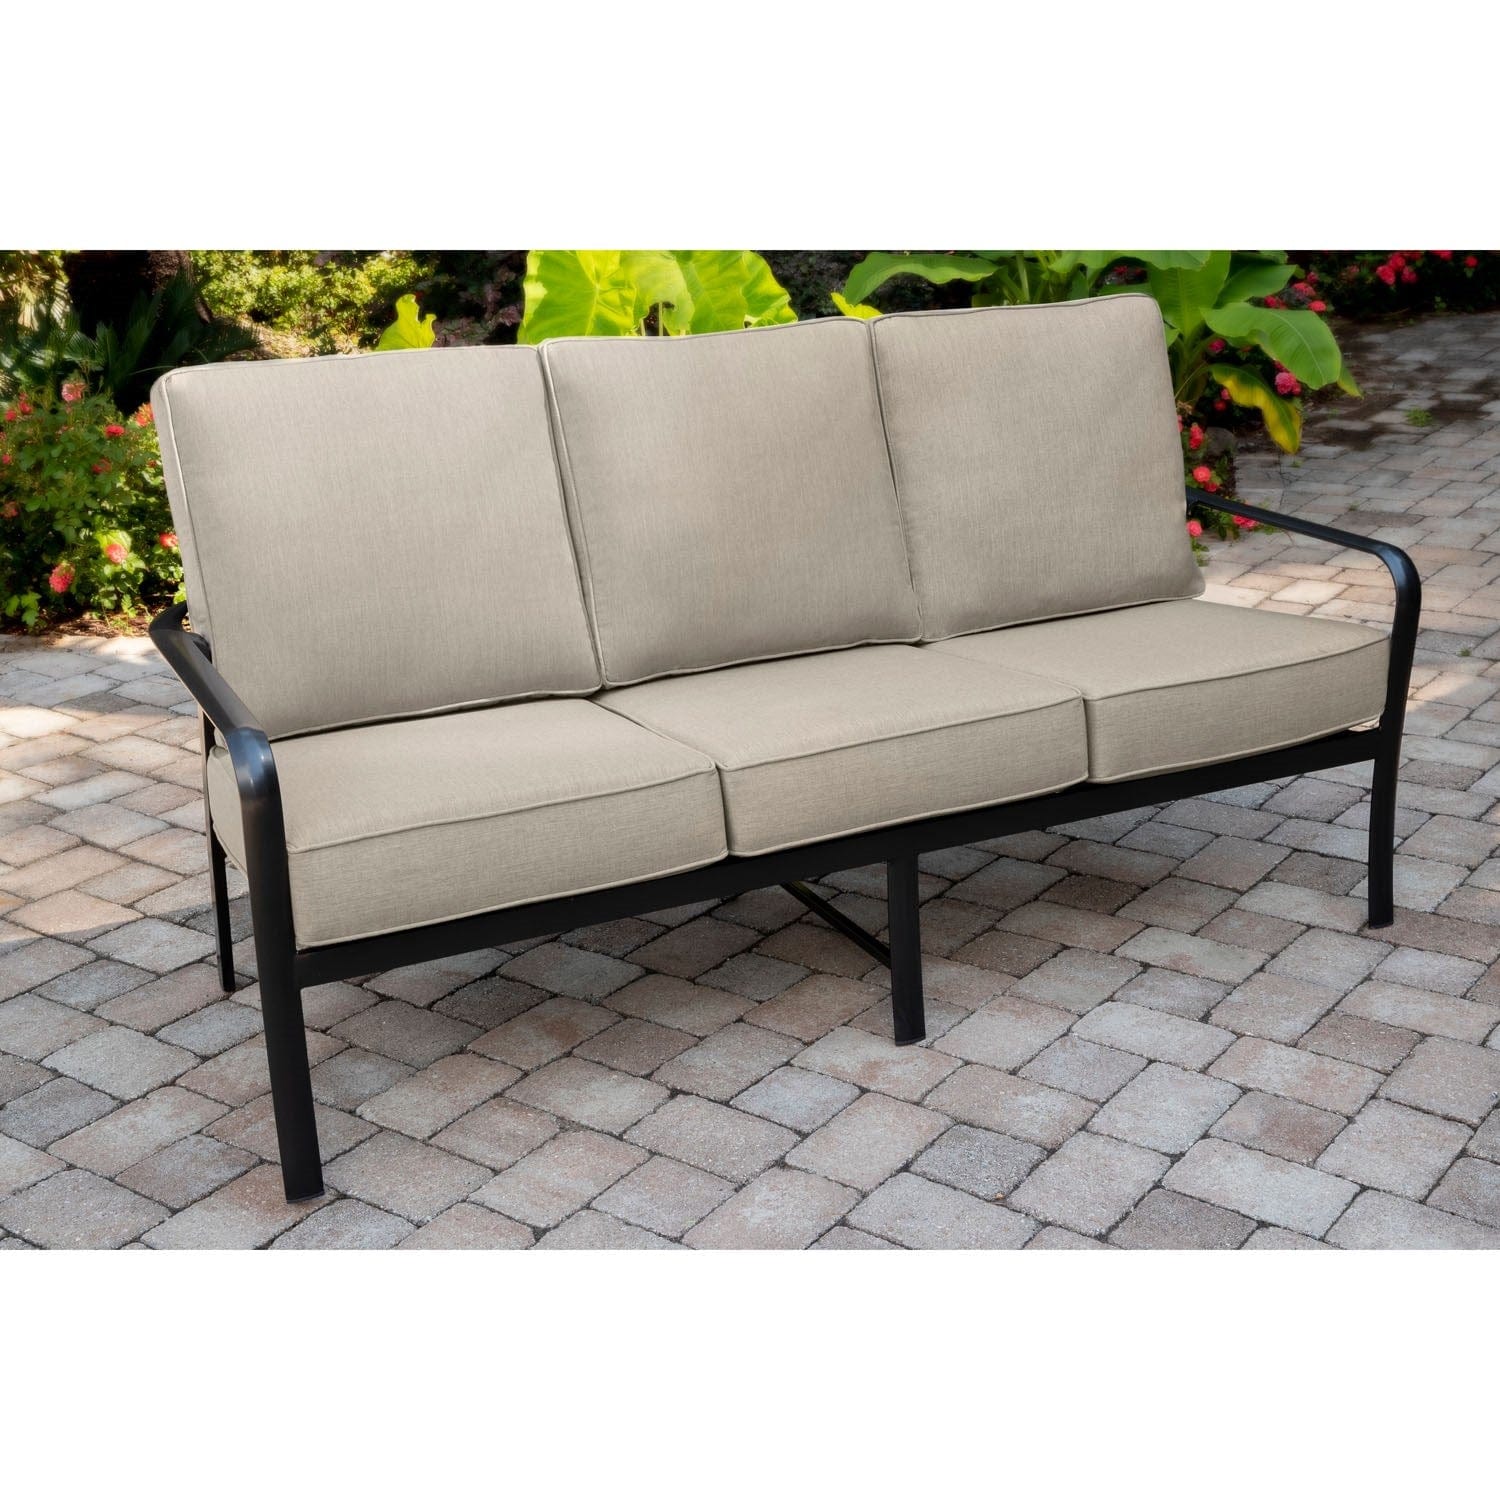 Hanover Conversation Set Hanover - Cortino 5-Piece Commercial-Grade Patio Seating Set with 4 Cushioned Club Chairs and an Aluminum Slat-Top Coffee Table